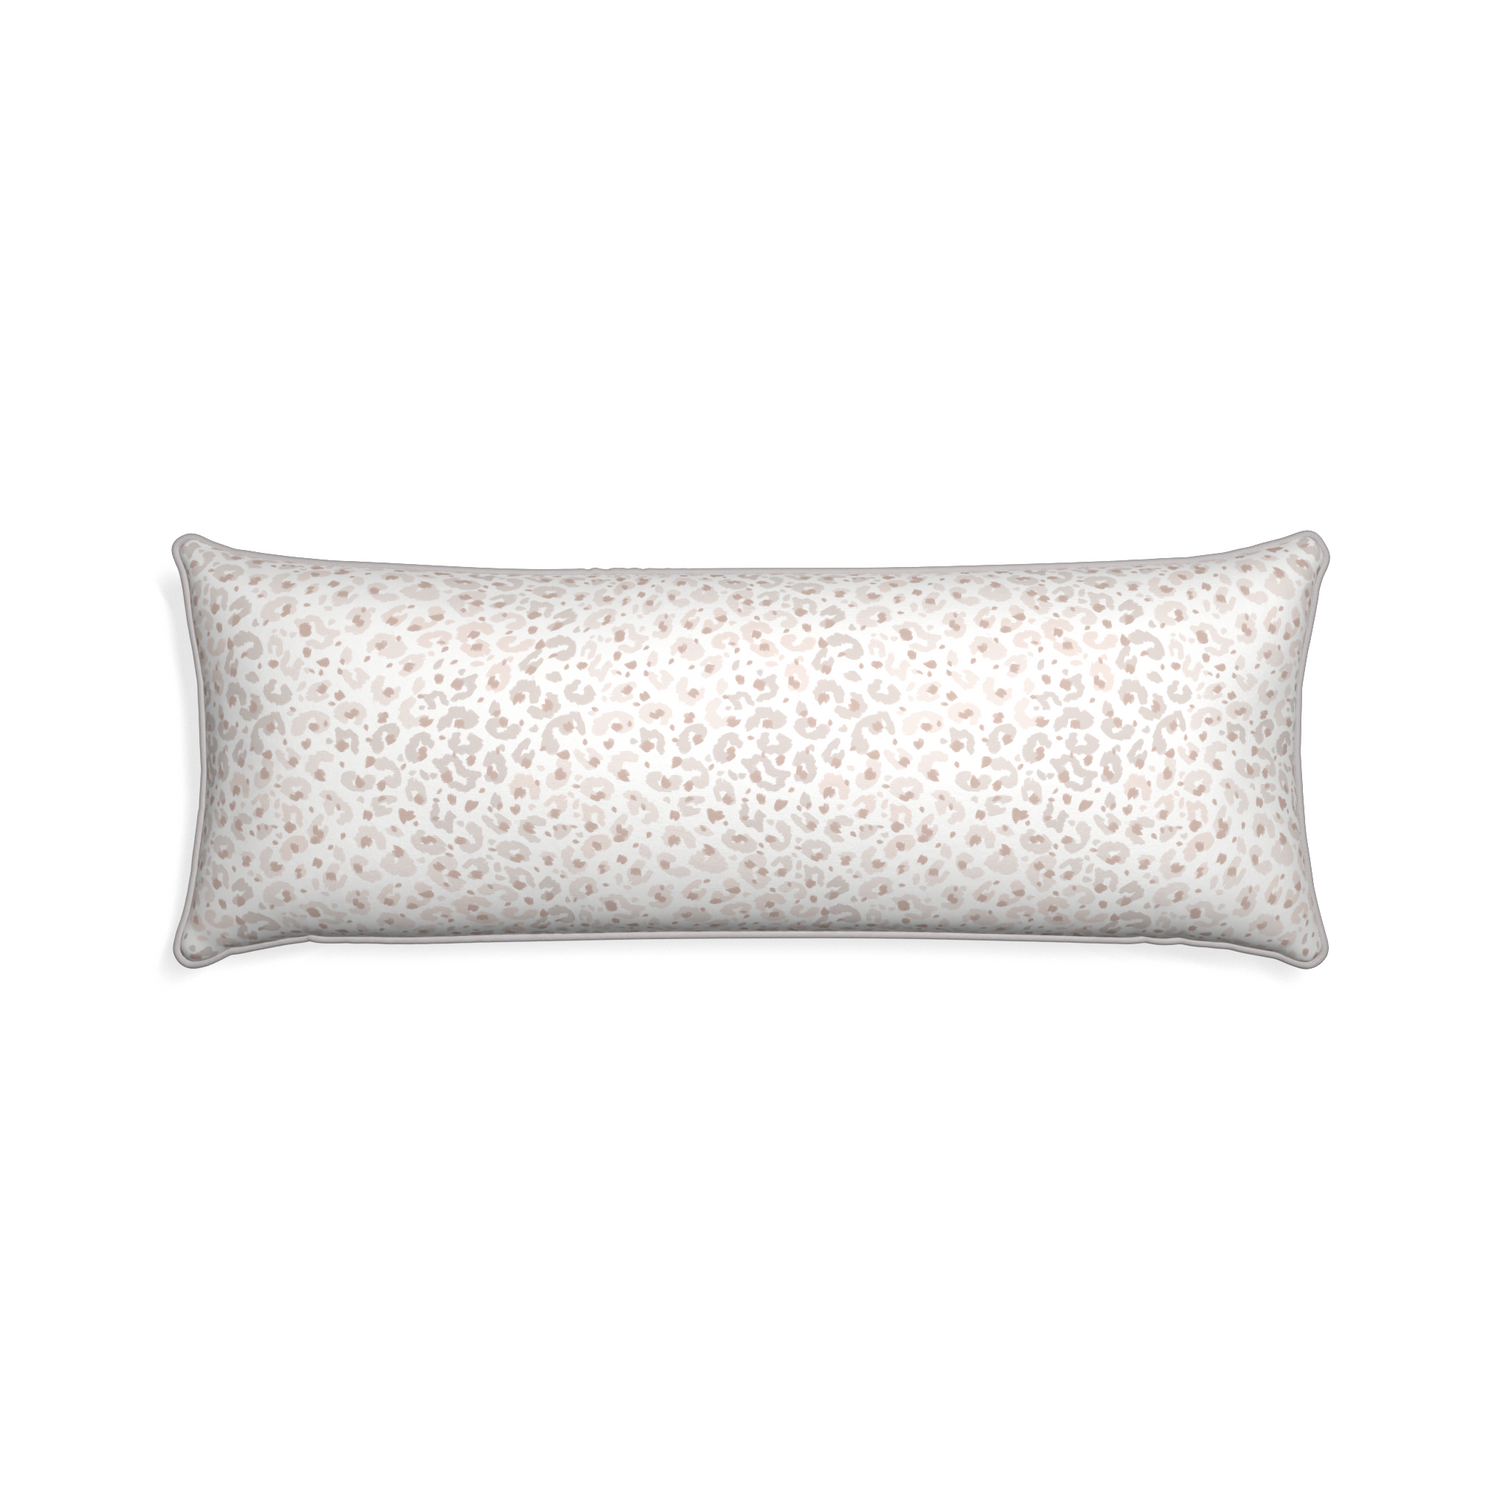 Xl-lumbar rosie custom pillow with pebble piping on white background